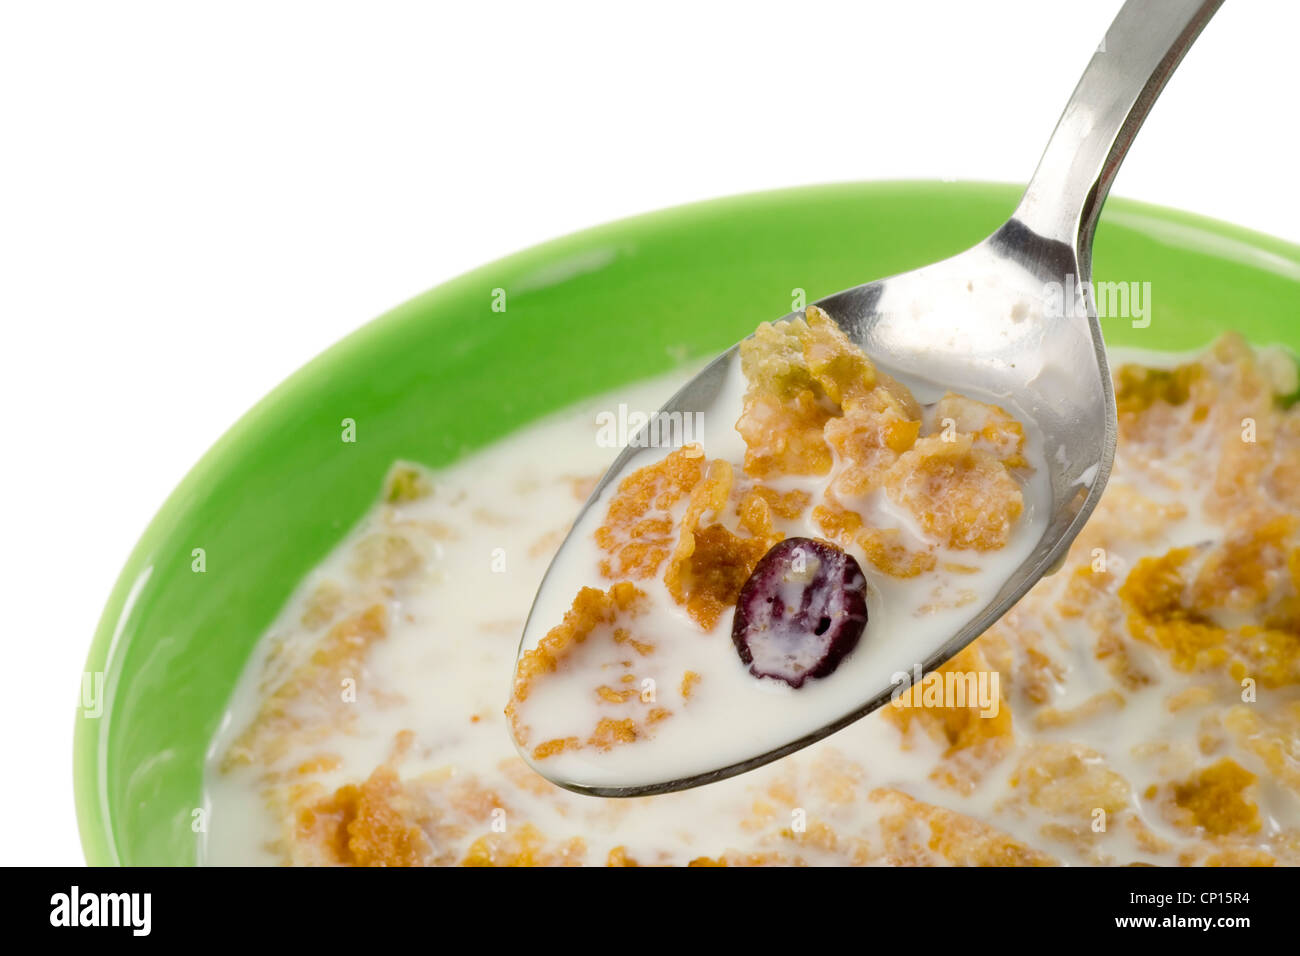 Spoonful of cereal with milk isolated on white background Stock Photo